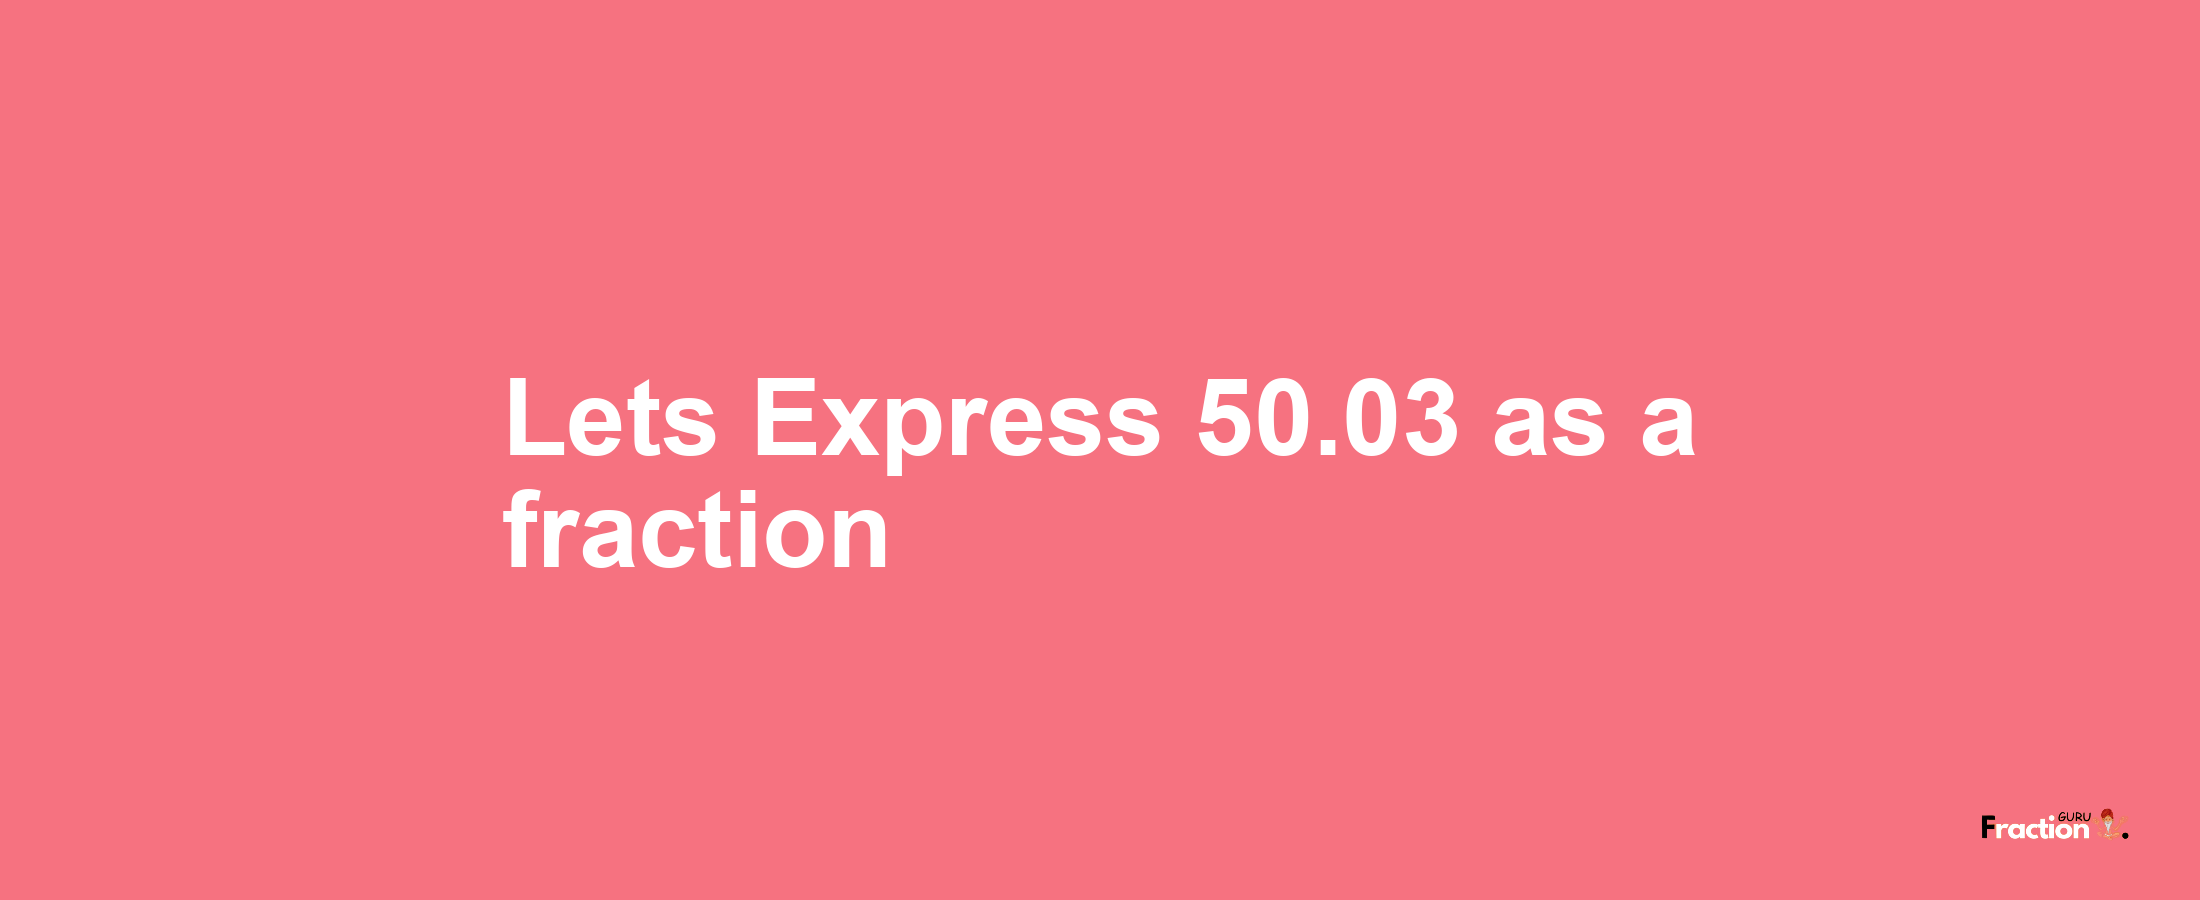 Lets Express 50.03 as afraction